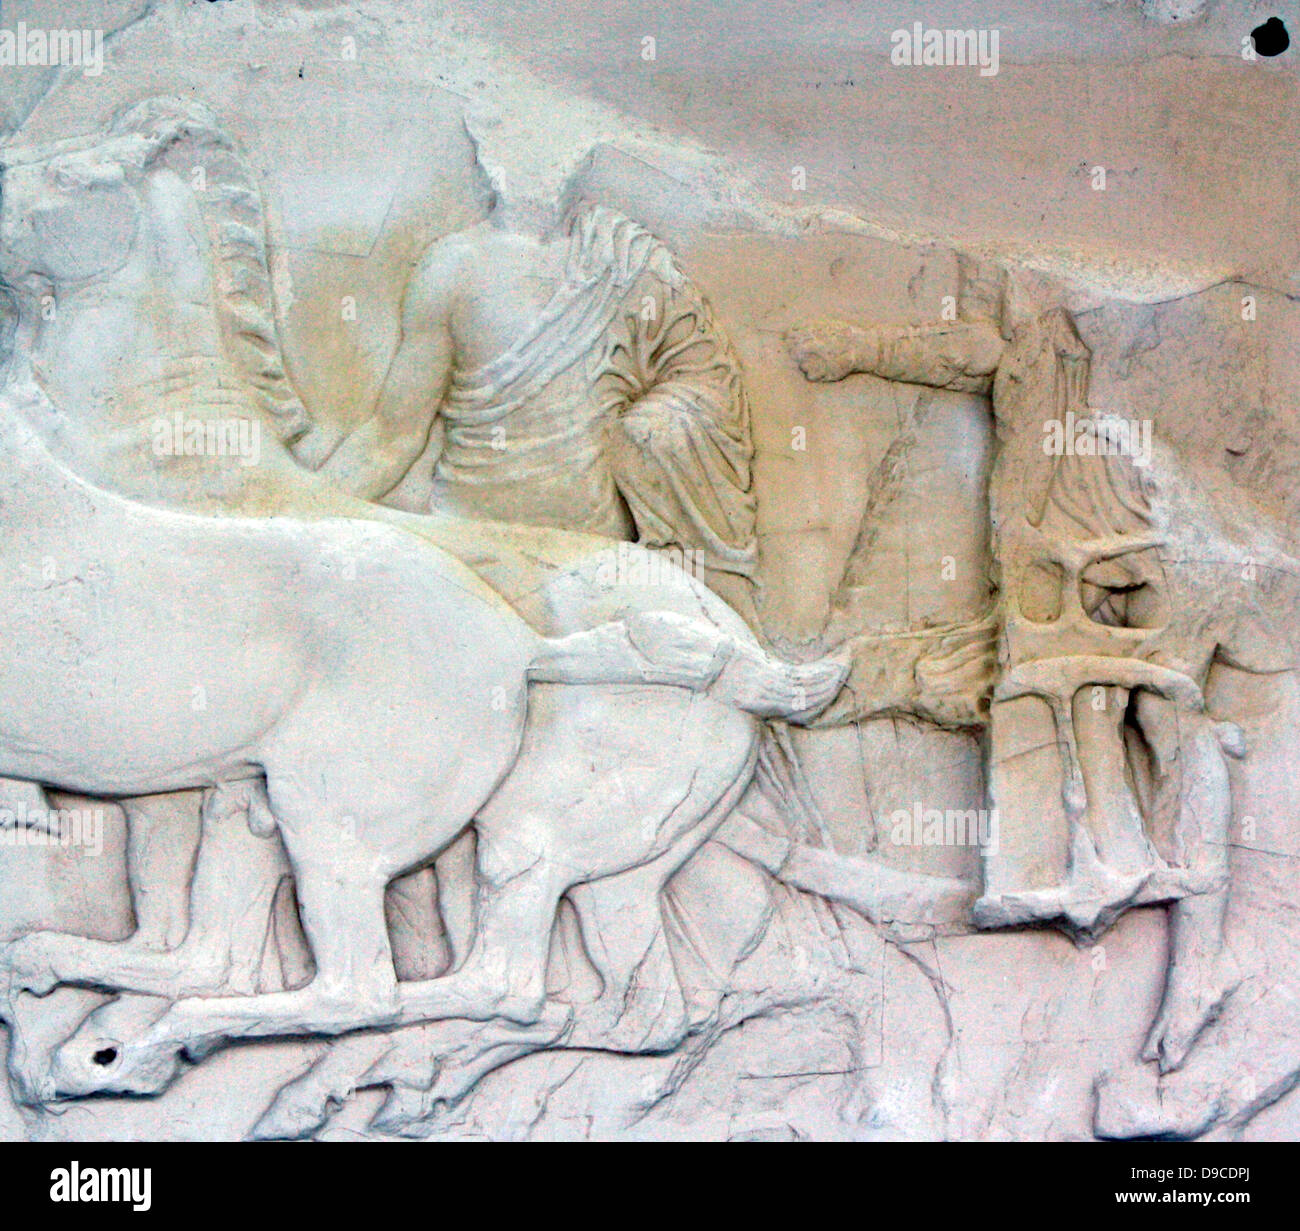 Galloping chariot horses.5th Century BC frieze from the Parthenon, Athens, Greece. Stock Photo